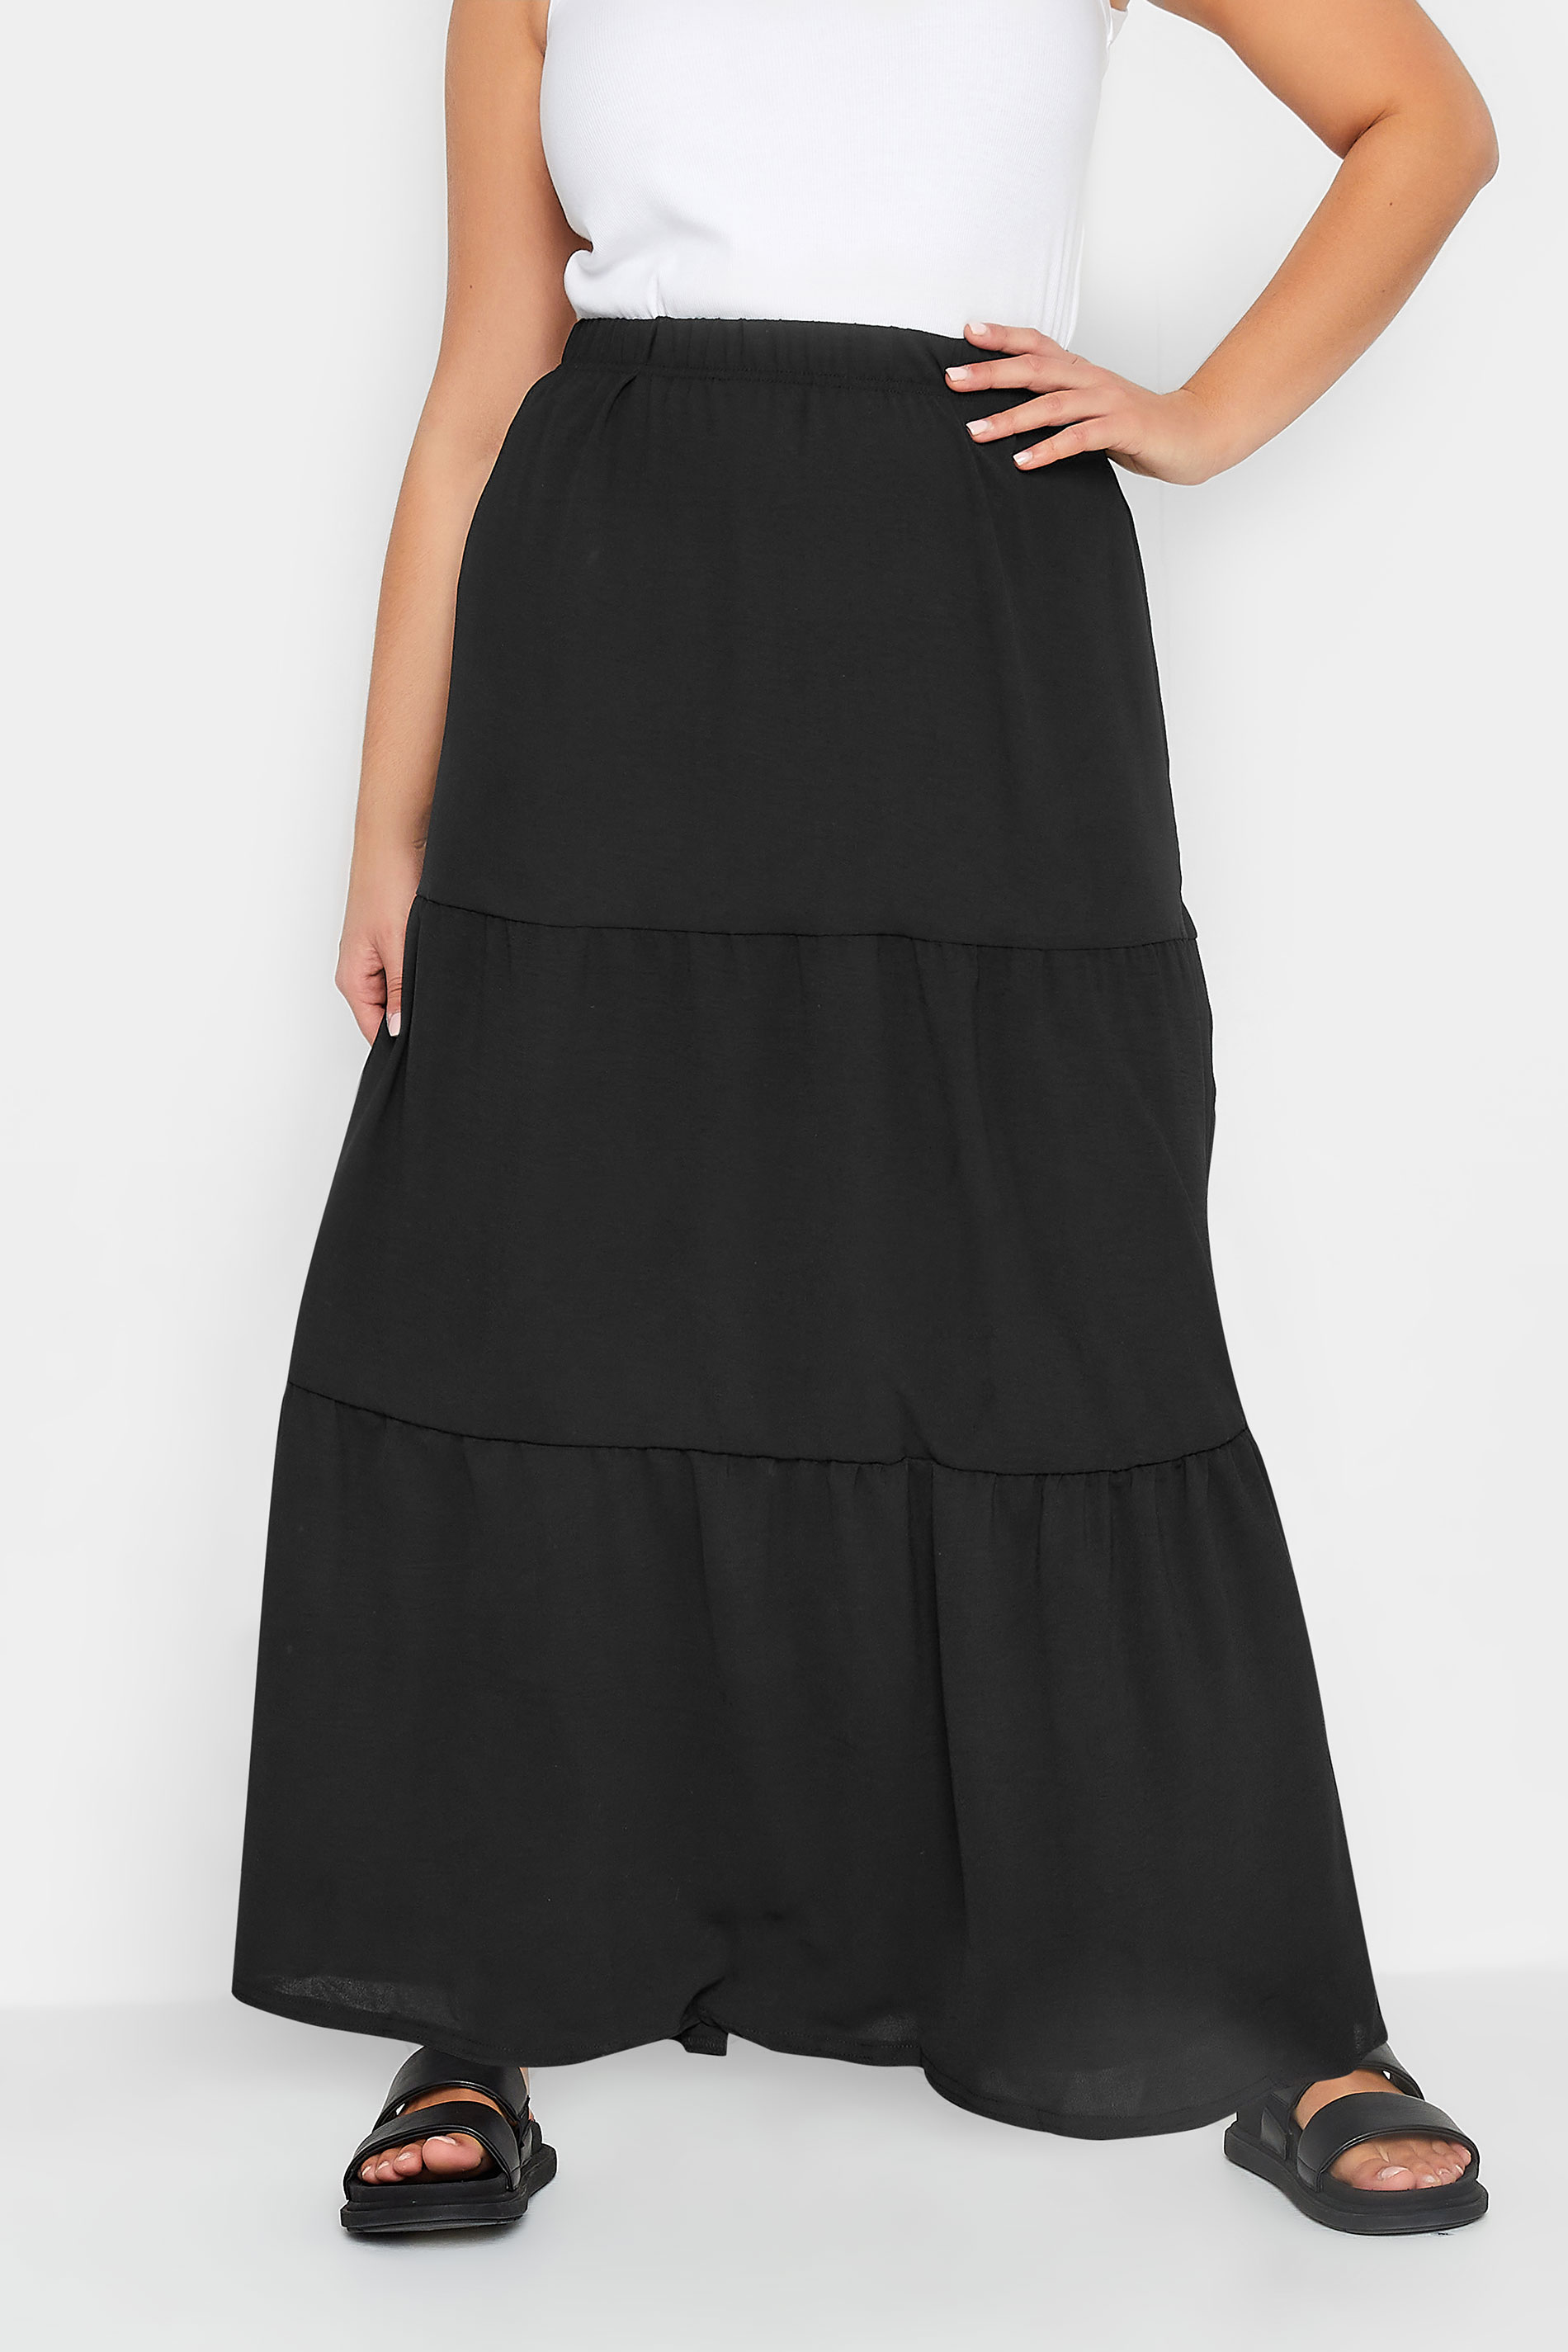 YOURS PETITE Plus Size Curve Black Crepe Maxi Skirt | Yours Clothing  1